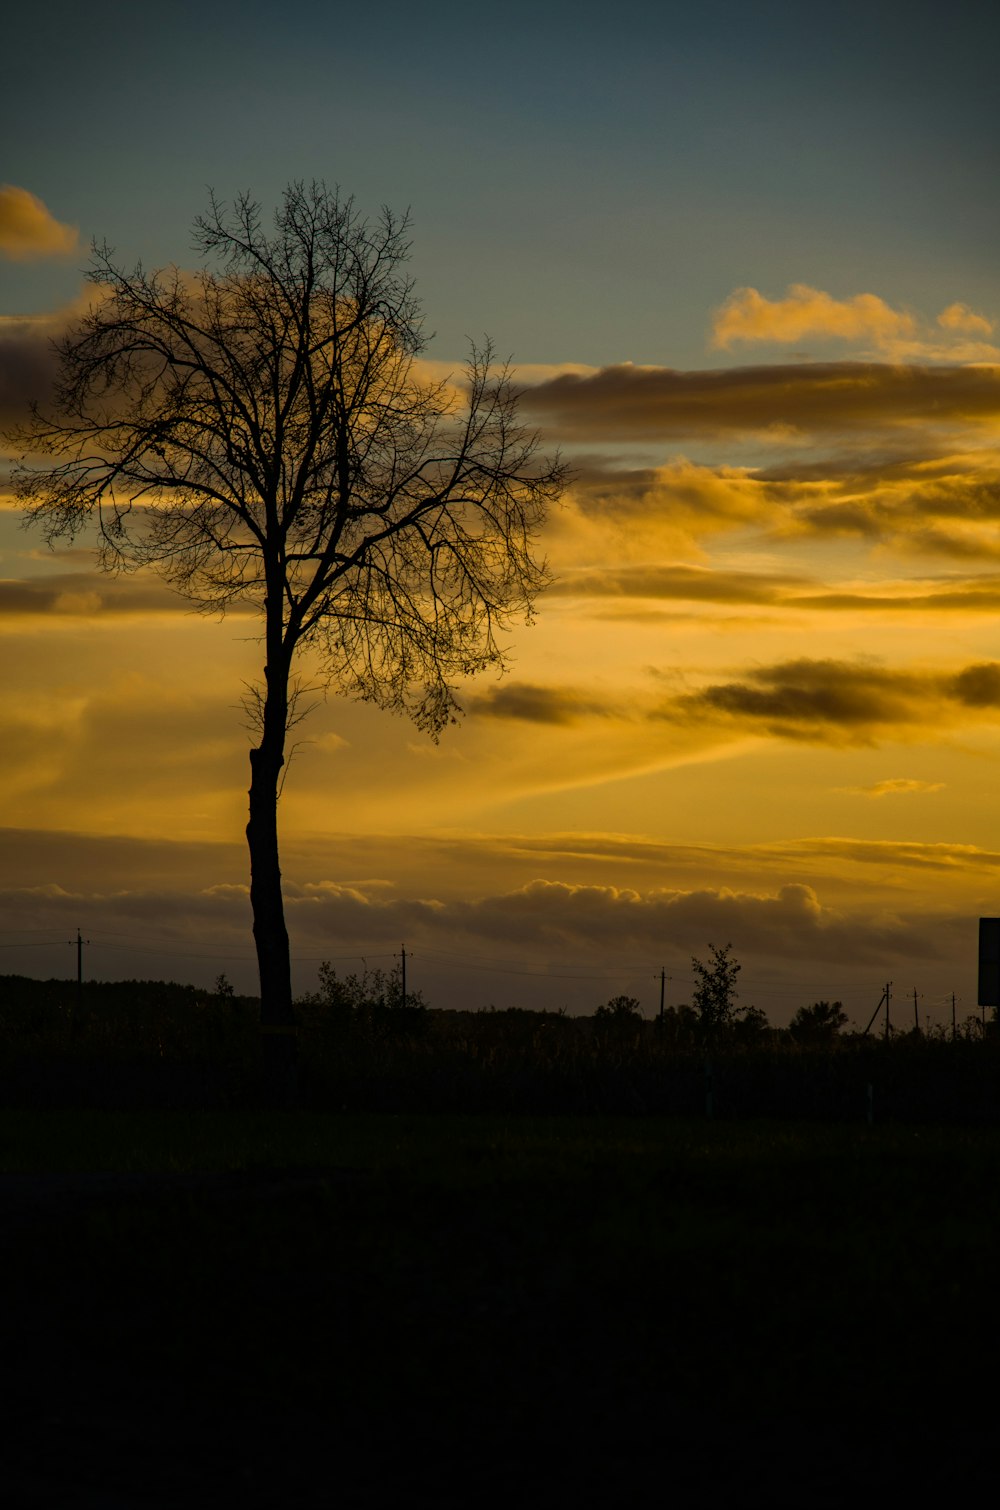 a lone tree silhouetted against a sunset sky